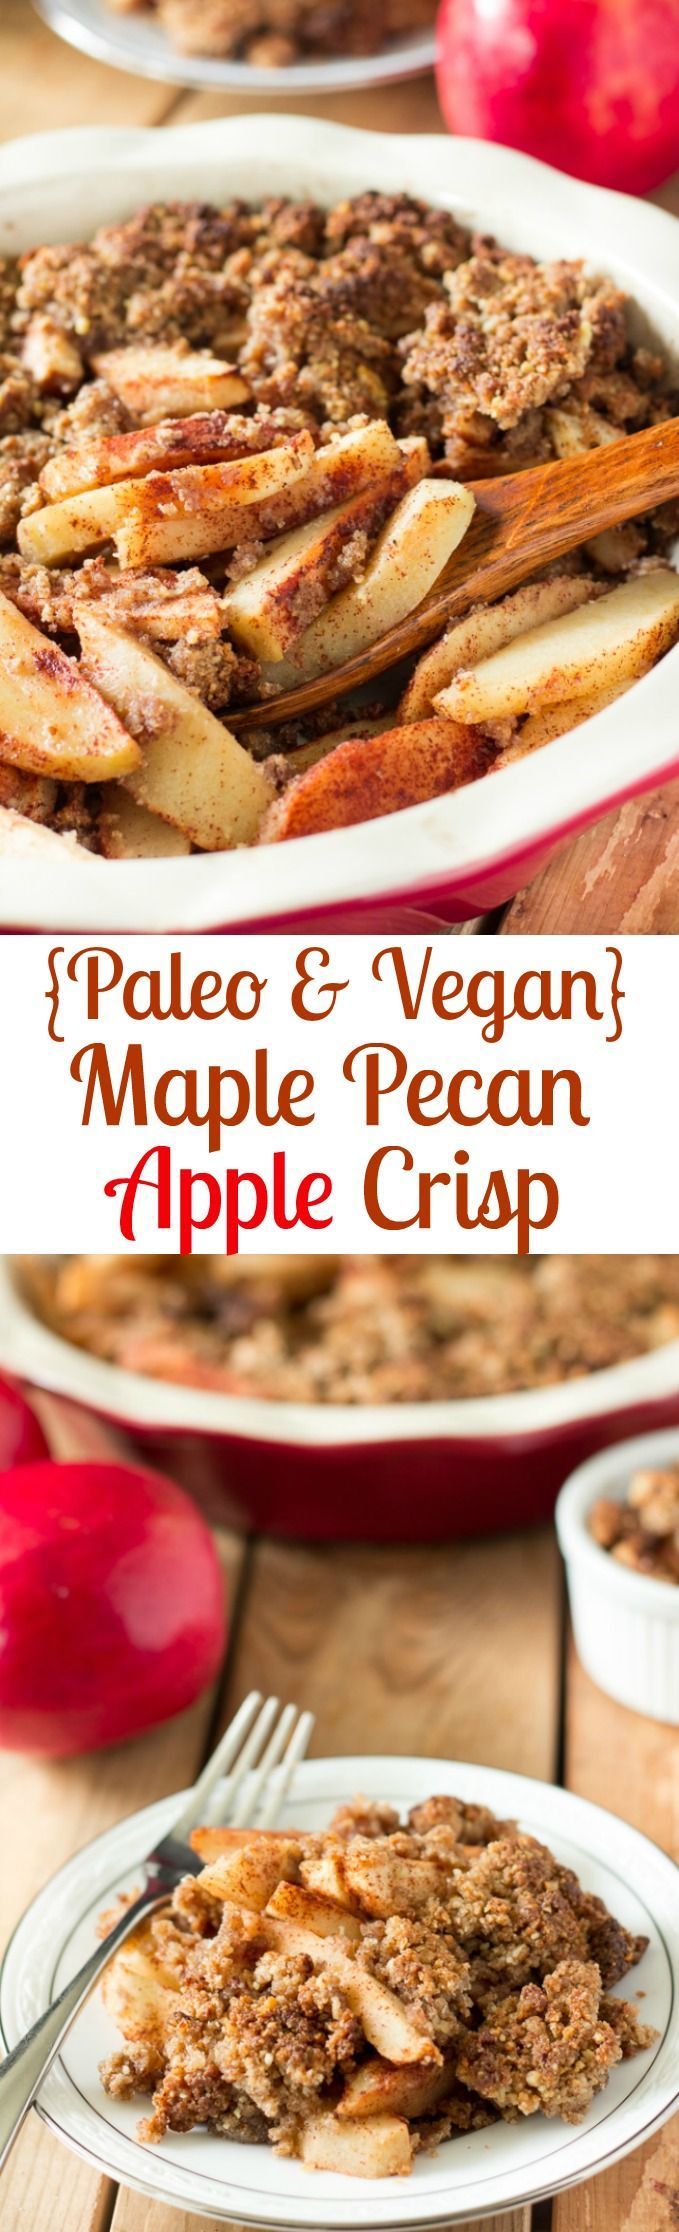 Paleo s incredibly easy to make, super healthy and a festive fall dessert that everyone will love!  Sweet maple syrup, nutty